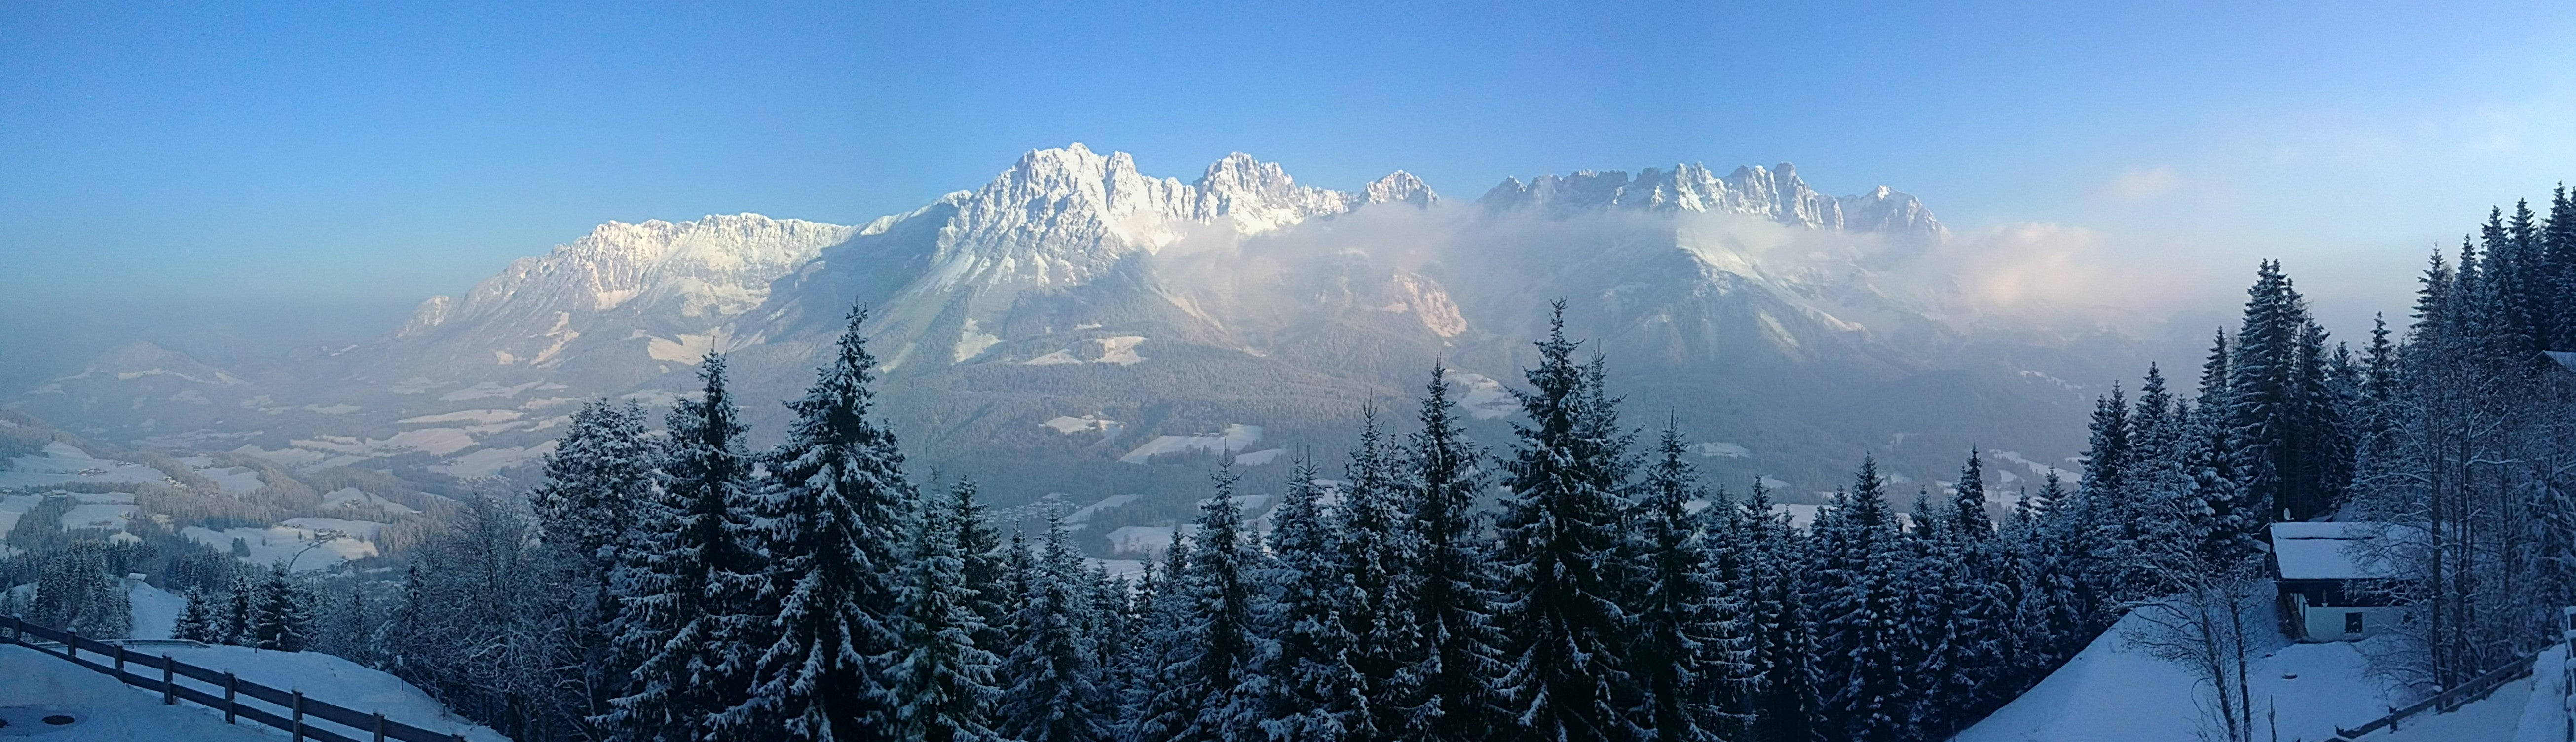 4. Anonymous - SE vivaz proAustrian mountains - Best of Cool Images, taken with your cell phones #1